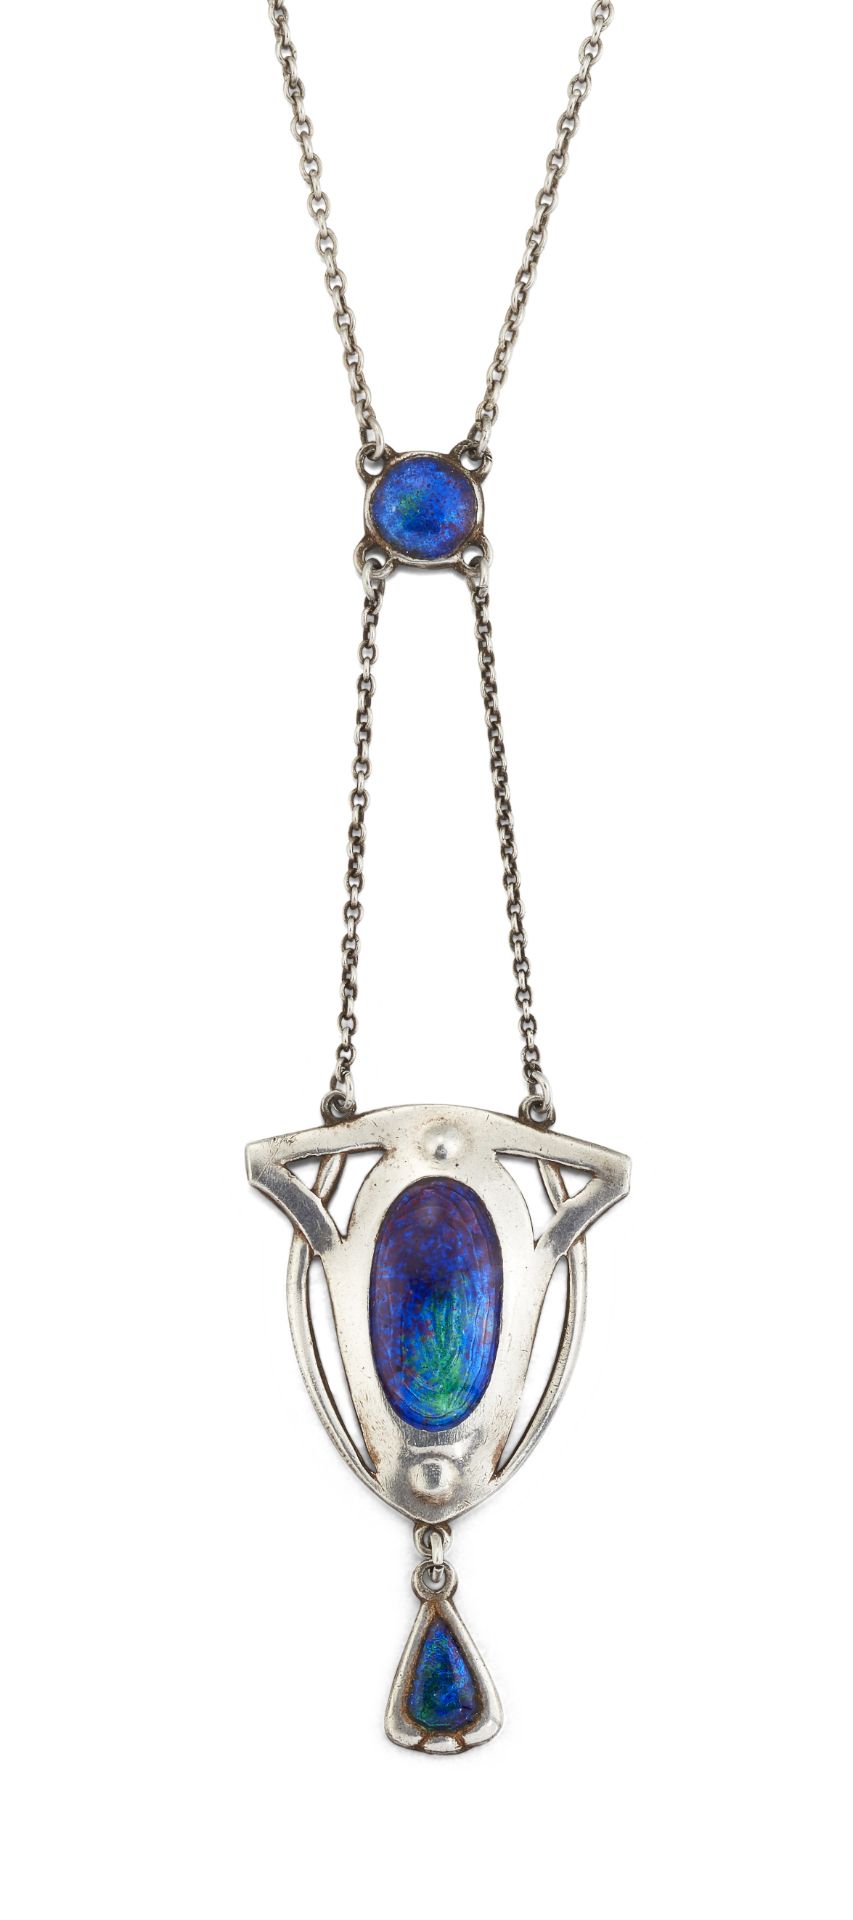 AN EARLY 20TH CENTURY ENAMEL PENDANT BY CHARLES HORNER,